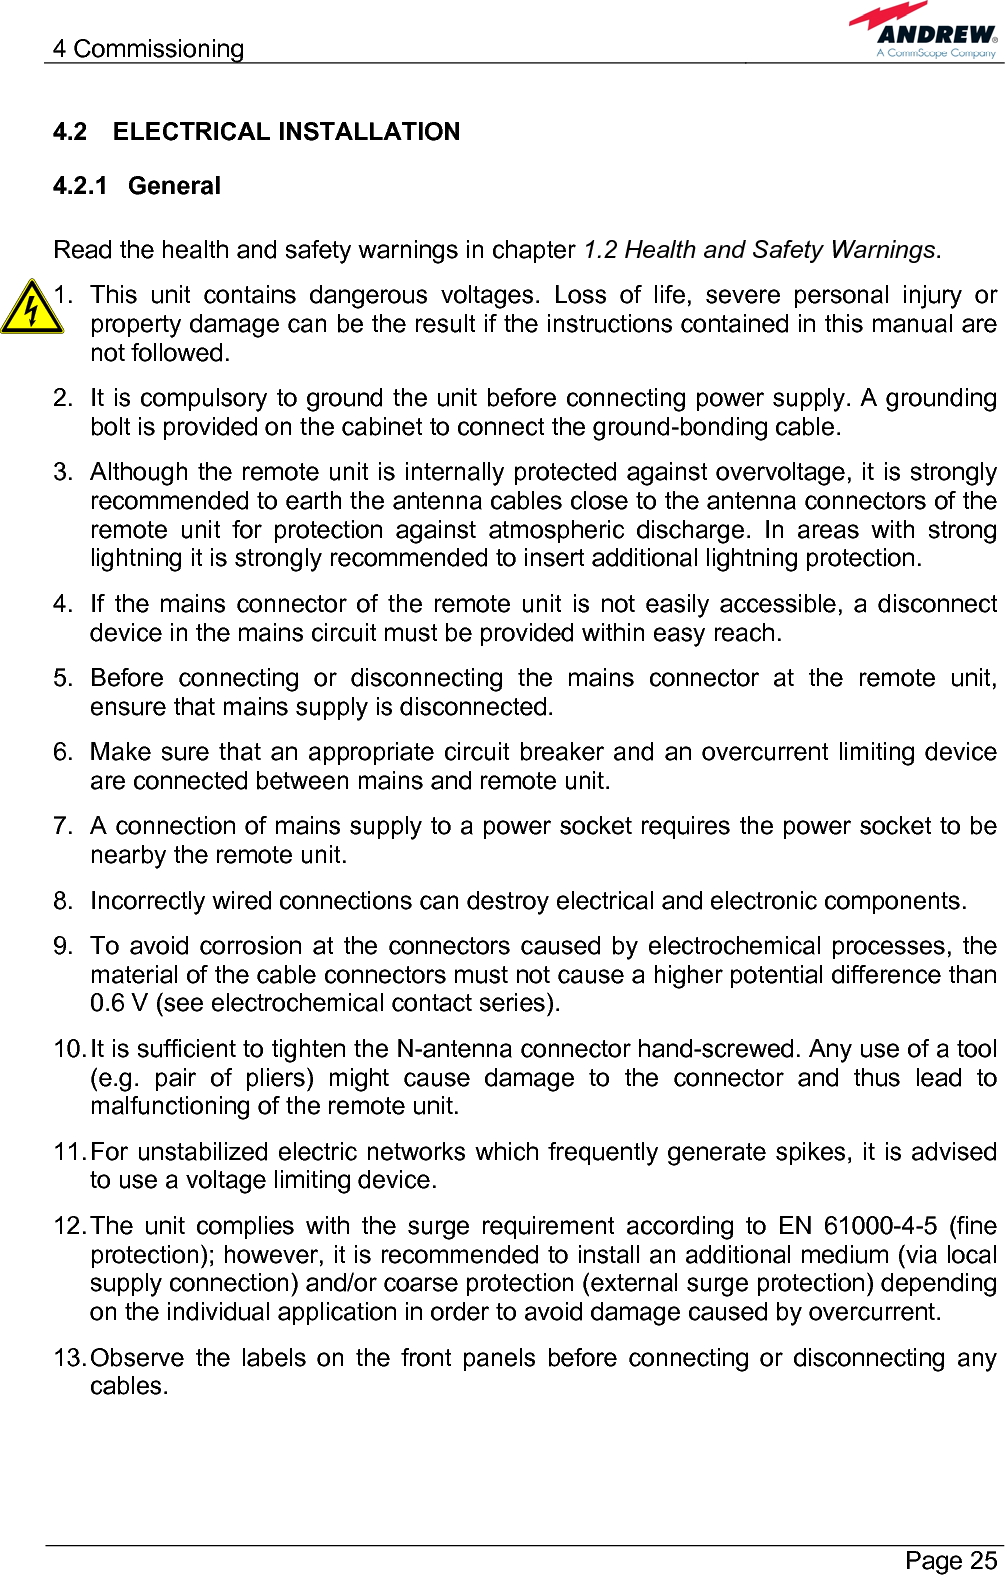 4 Commissioning       Page 25 4.2 ELECTRICAL INSTALLATION 4.2.1 General  Read the health and safety warnings in chapter 1.2 Health and Safety Warnings. 1.  This unit contains dangerous voltages. Loss of life, severe personal injury or property damage can be the result if the instructions contained in this manual are not followed. 2.  It is compulsory to ground the unit before connecting power supply. A grounding bolt is provided on the cabinet to connect the ground-bonding cable. 3.  Although the remote unit is internally protected against overvoltage, it is strongly recommended to earth the antenna cables close to the antenna connectors of the remote unit for protection against atmospheric discharge. In areas with strong lightning it is strongly recommended to insert additional lightning protection. 4.  If the mains connector of the remote unit is not easily accessible, a disconnect device in the mains circuit must be provided within easy reach. 5. Before connecting or disconnecting the mains connector at the remote unit, ensure that mains supply is disconnected. 6.  Make sure that an appropriate circuit breaker and an overcurrent limiting device are connected between mains and remote unit. 7.  A connection of mains supply to a power socket requires the power socket to be nearby the remote unit. 8.  Incorrectly wired connections can destroy electrical and electronic components. 9.  To avoid corrosion at the connectors caused by electrochemical processes, the material of the cable connectors must not cause a higher potential difference than 0.6 V (see electrochemical contact series). 10. It is sufficient to tighten the N-antenna connector hand-screwed. Any use of a tool (e.g. pair of pliers) might cause damage to the connector and thus lead to malfunctioning of the remote unit. 11. For unstabilized electric networks which frequently generate spikes, it is advised to use a voltage limiting device.  12. The unit complies with the surge requirement according to EN 61000-4-5 (fine protection); however, it is recommended to install an additional medium (via local supply connection) and/or coarse protection (external surge protection) depending on the individual application in order to avoid damage caused by overcurrent. 13. Observe the labels on the front panels before connecting or disconnecting any cables. 